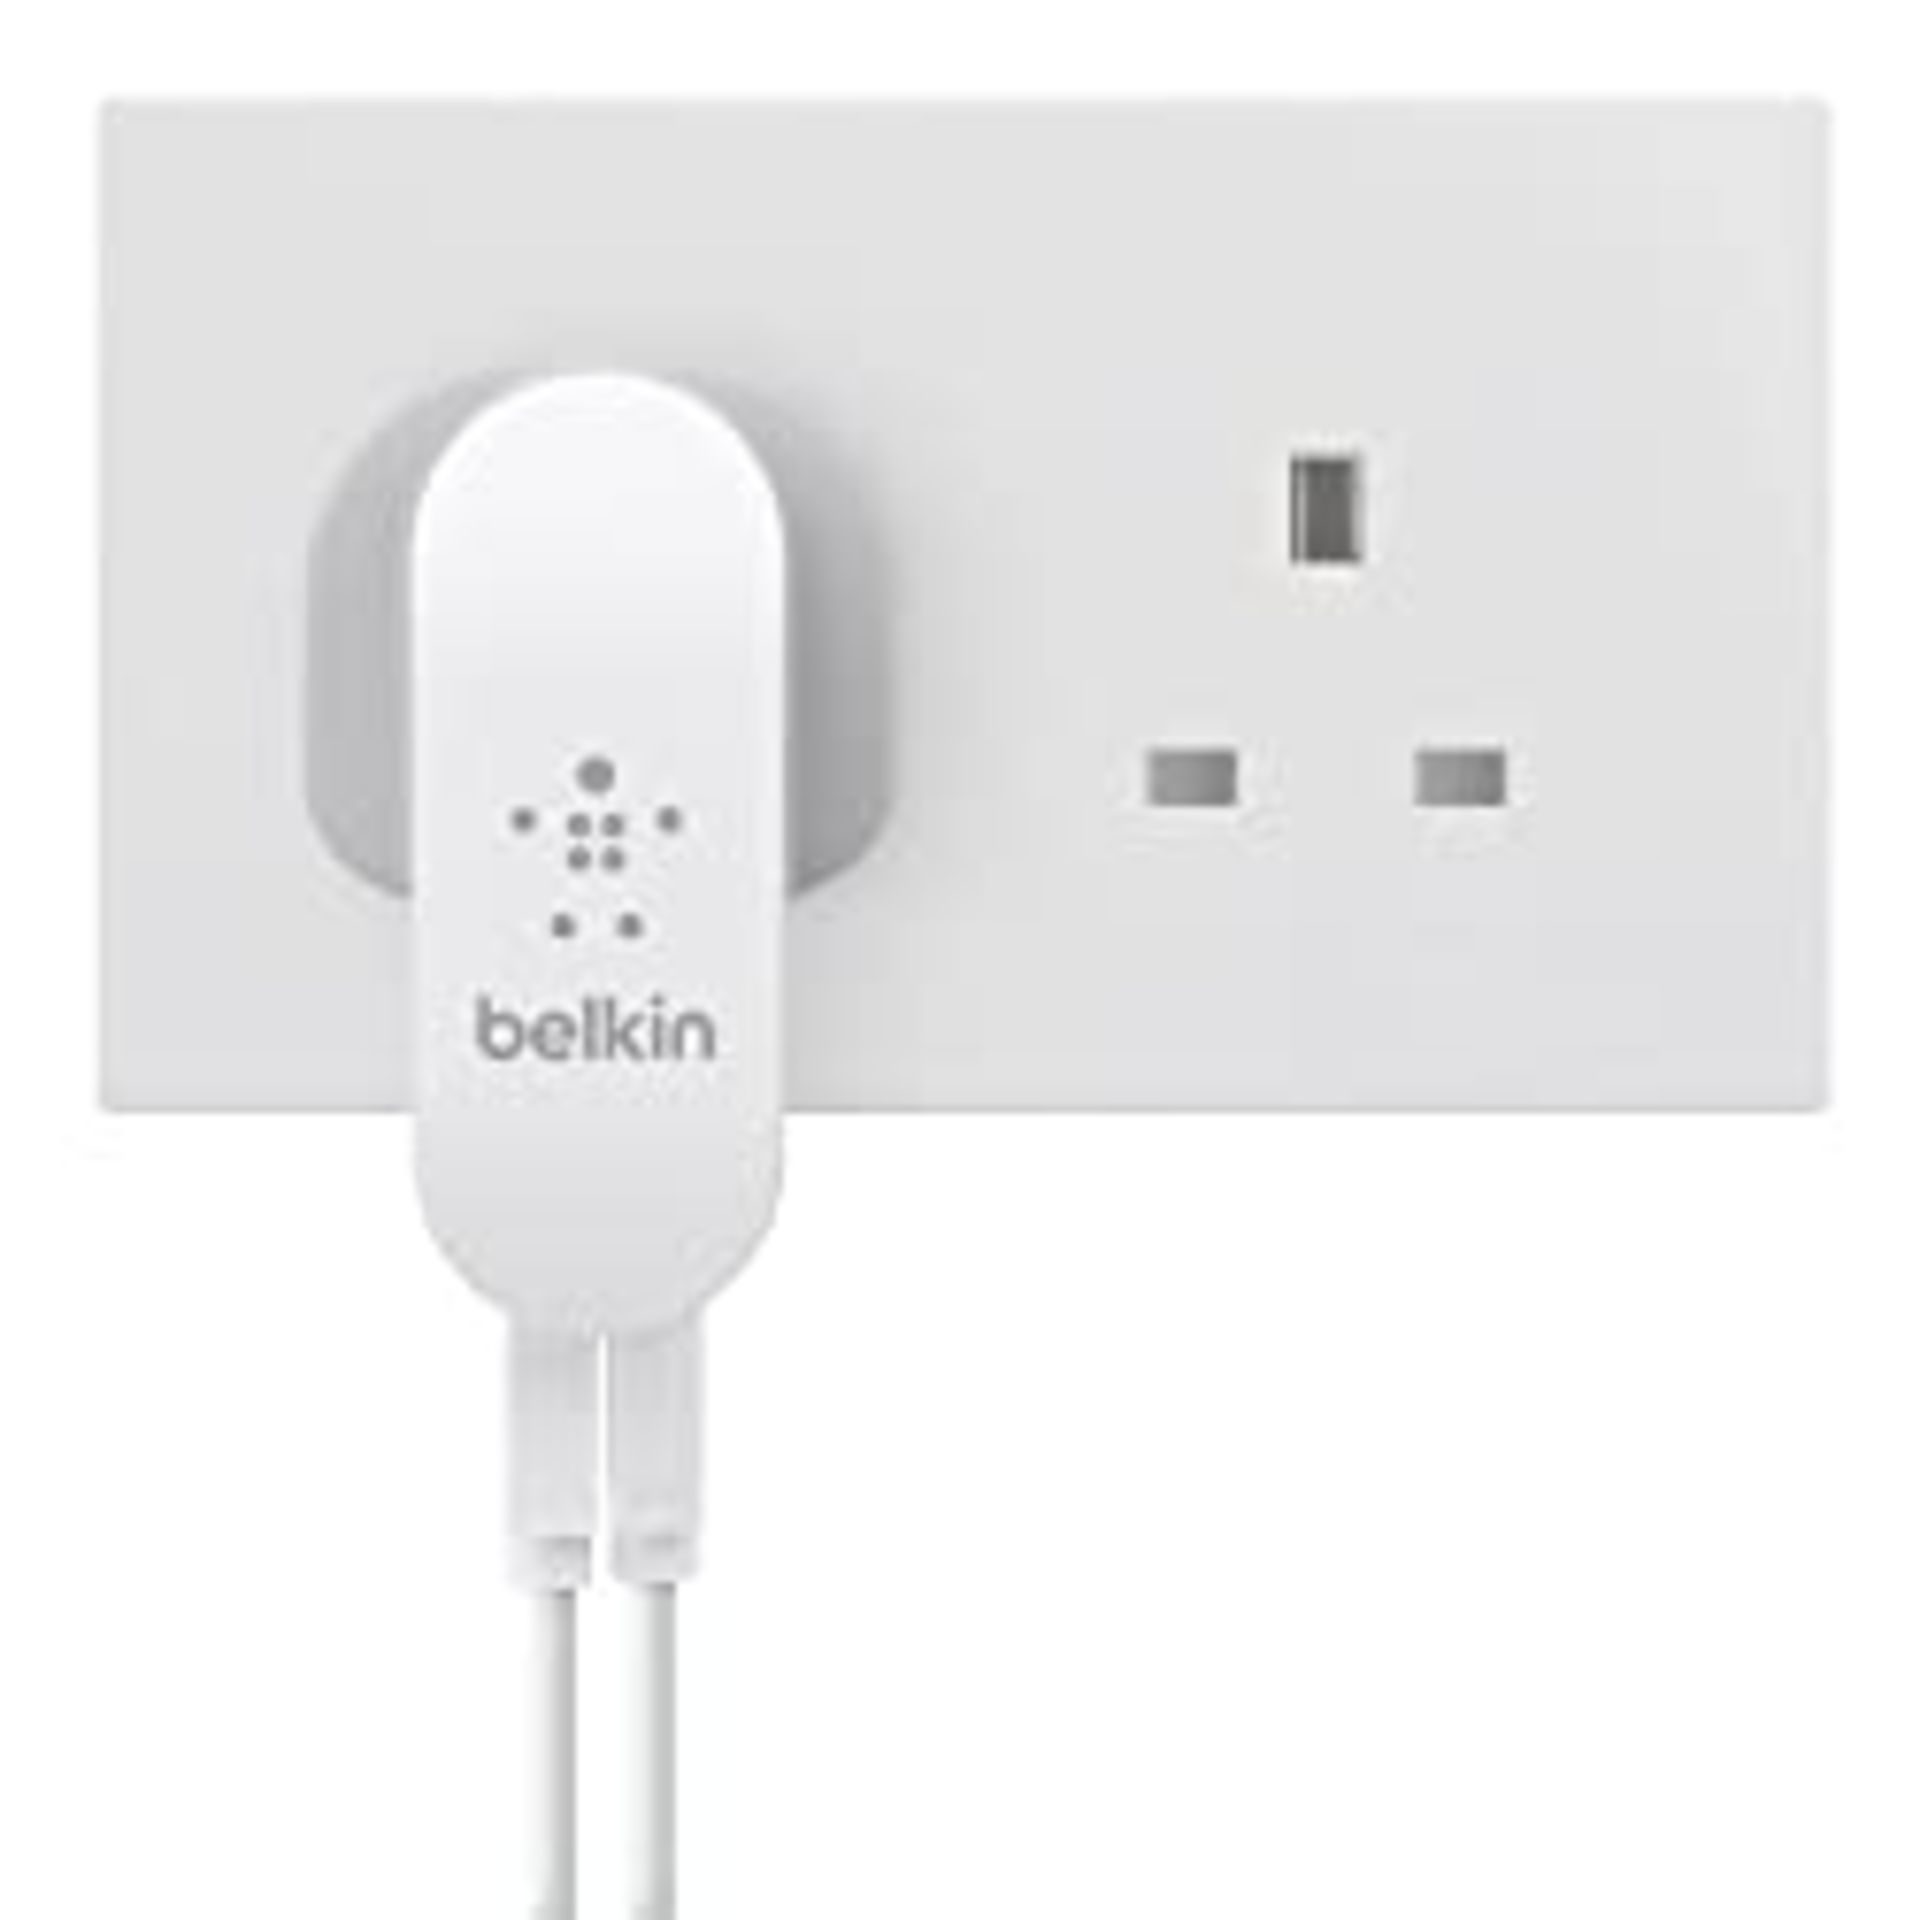 RRP £11.00 Belkin F8J107ukWHT Indoor Mobile Device Charger - Grey/White